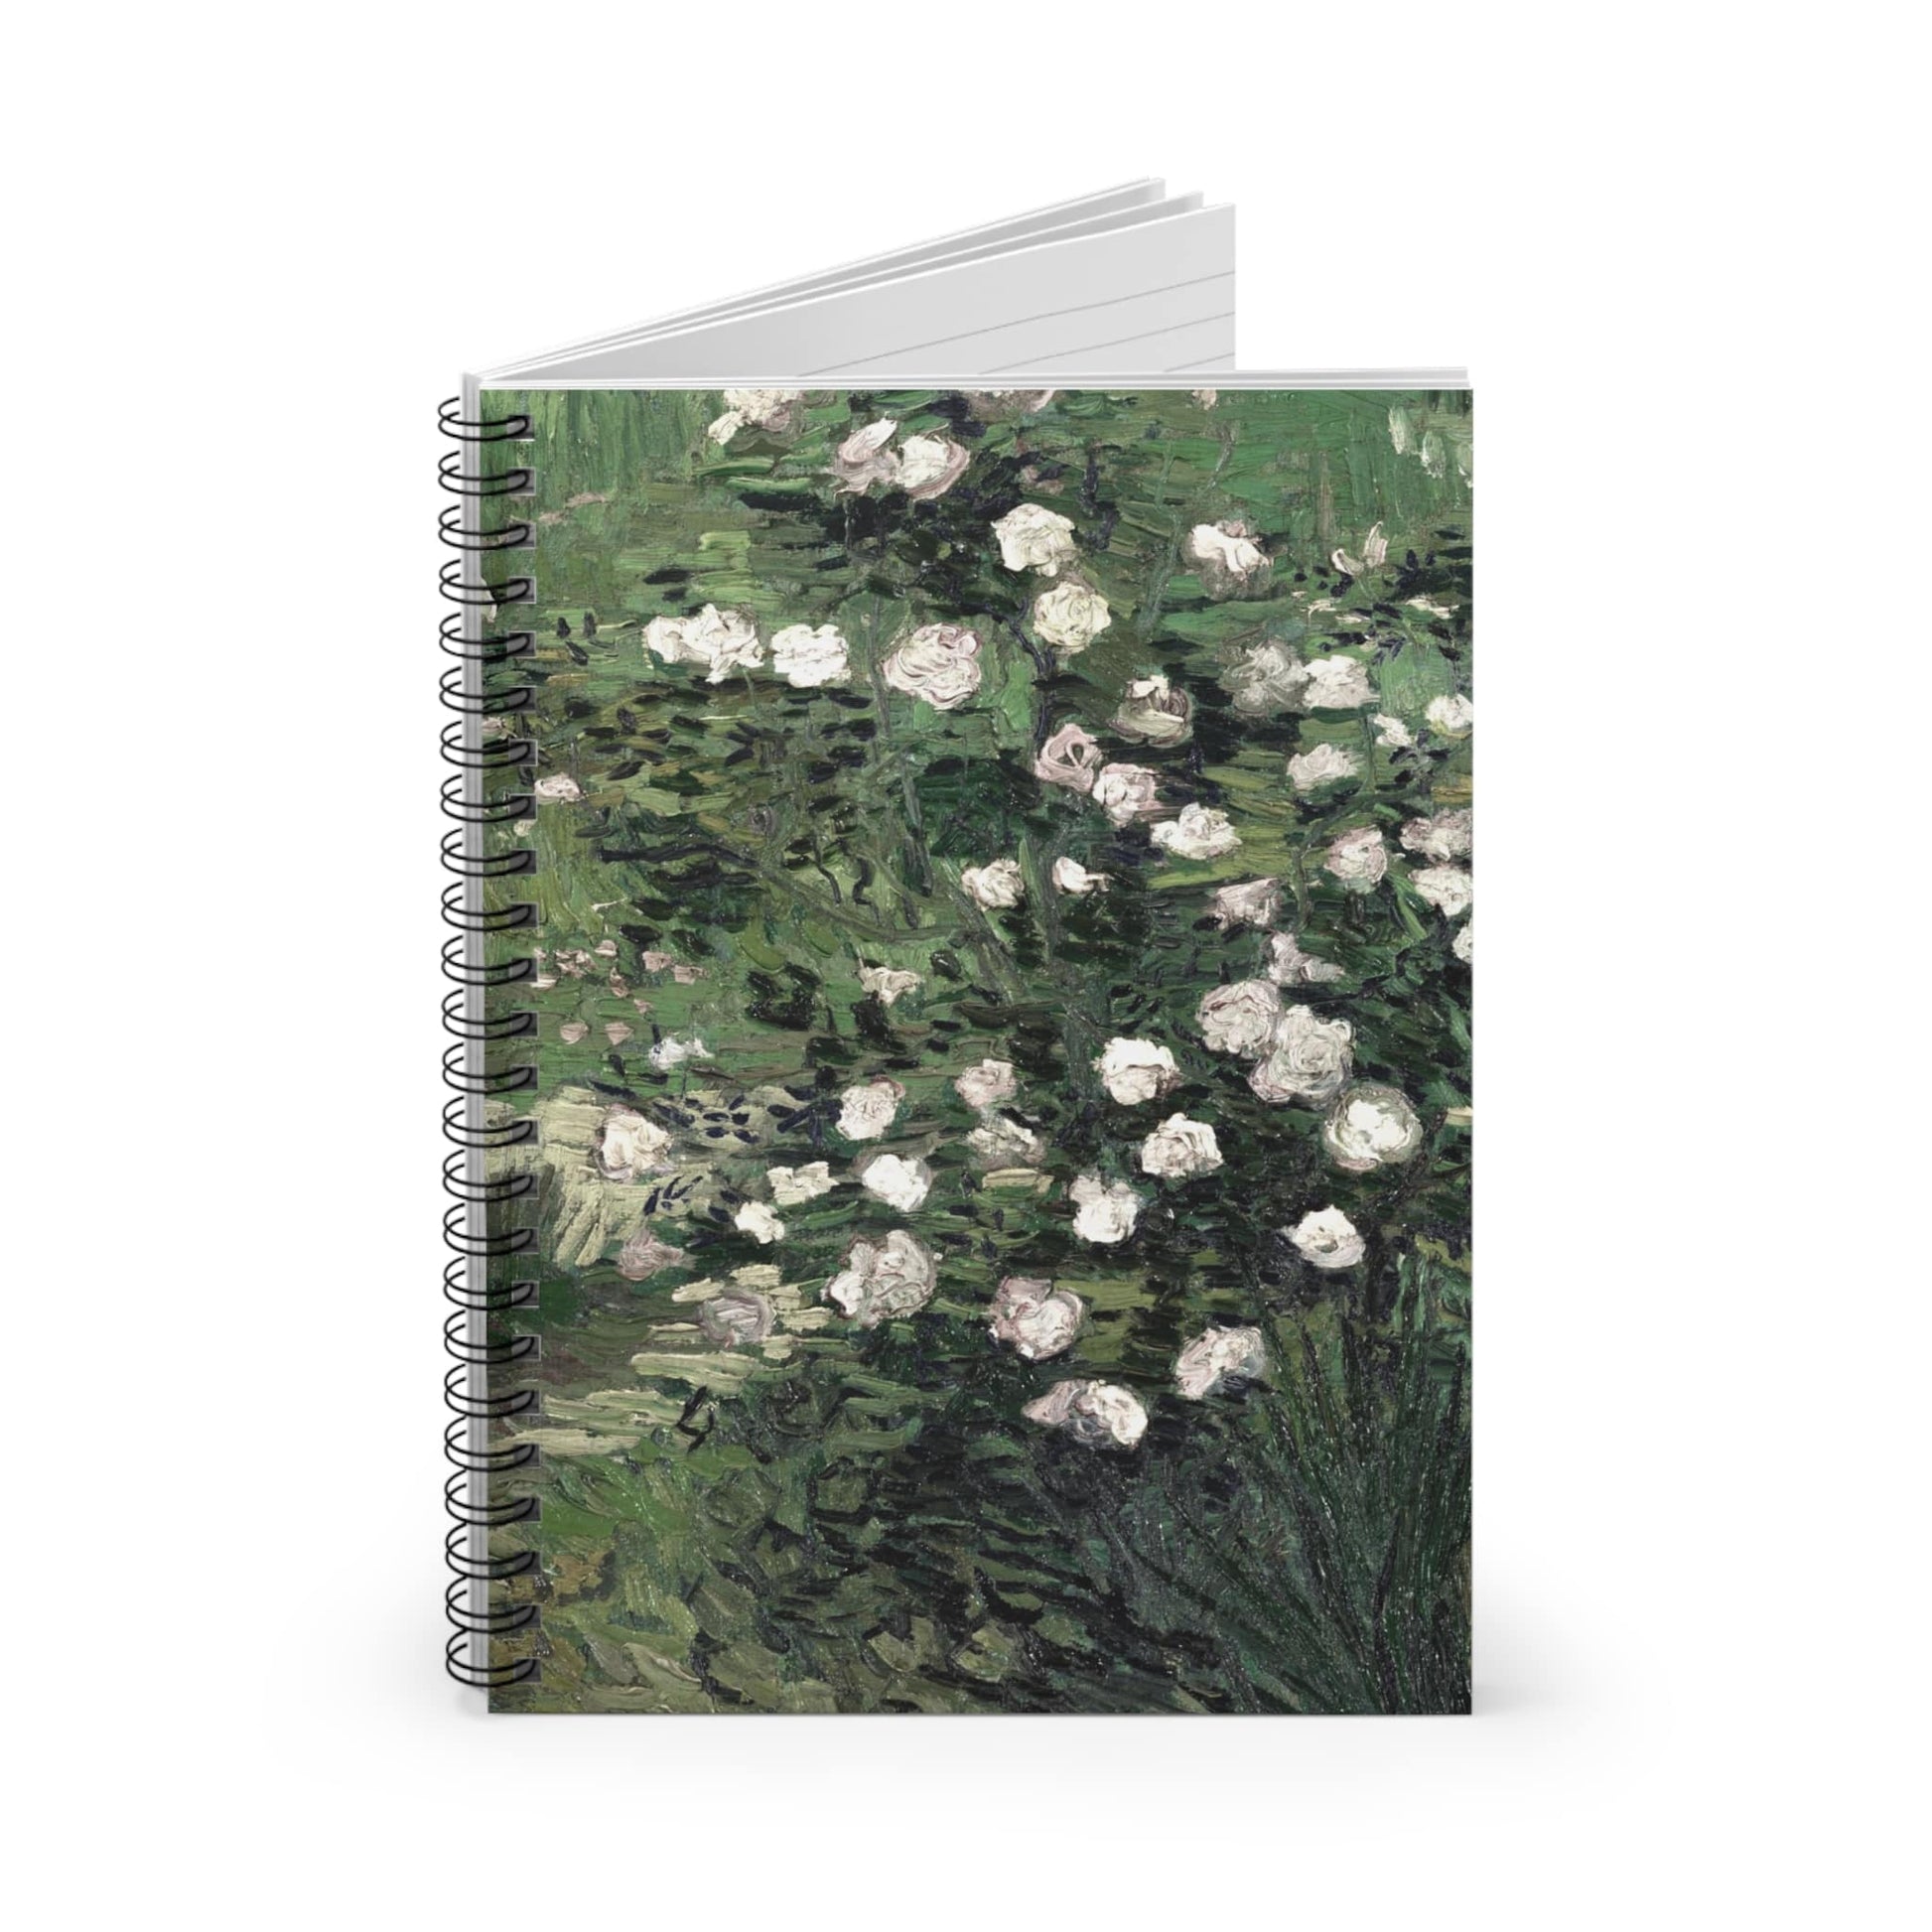 Green with White Flowers Spiral Notebook Standing up on White Desk